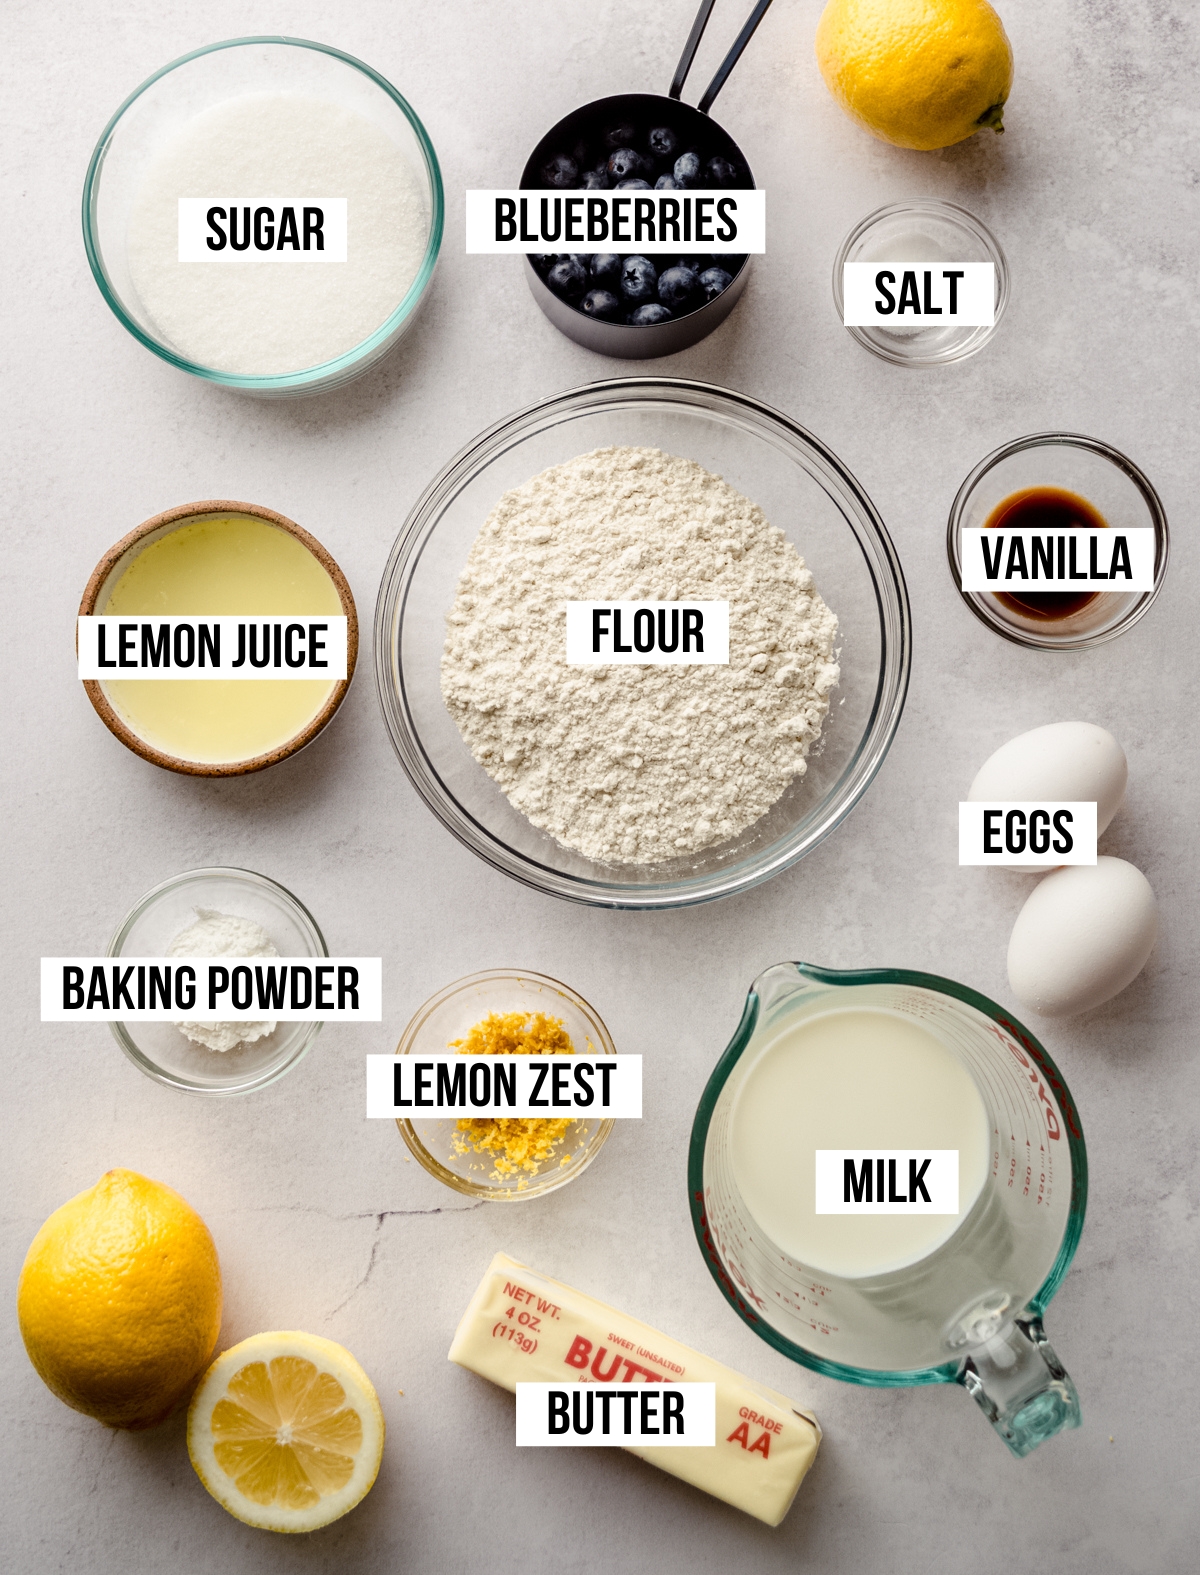 Aerial photo of ingredients for lemon blueberry cupcakes with text overlay labeling each ingredient.